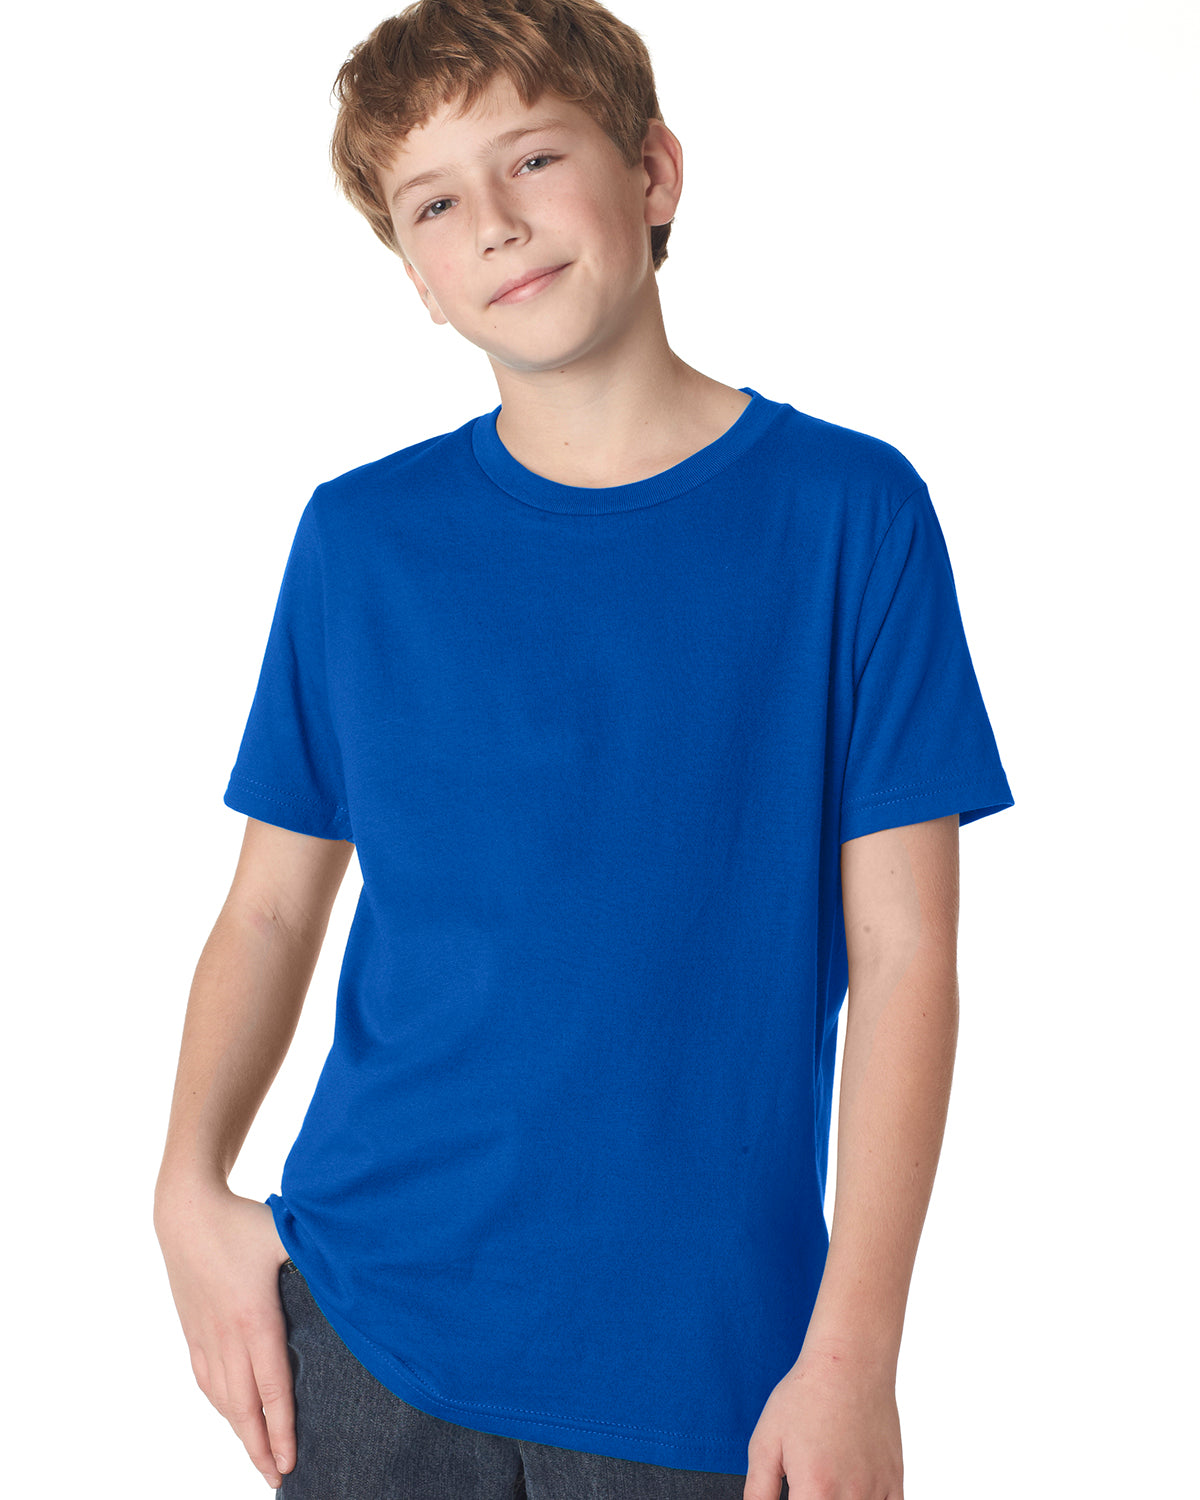 child model wearing next level youth tee in royal blue